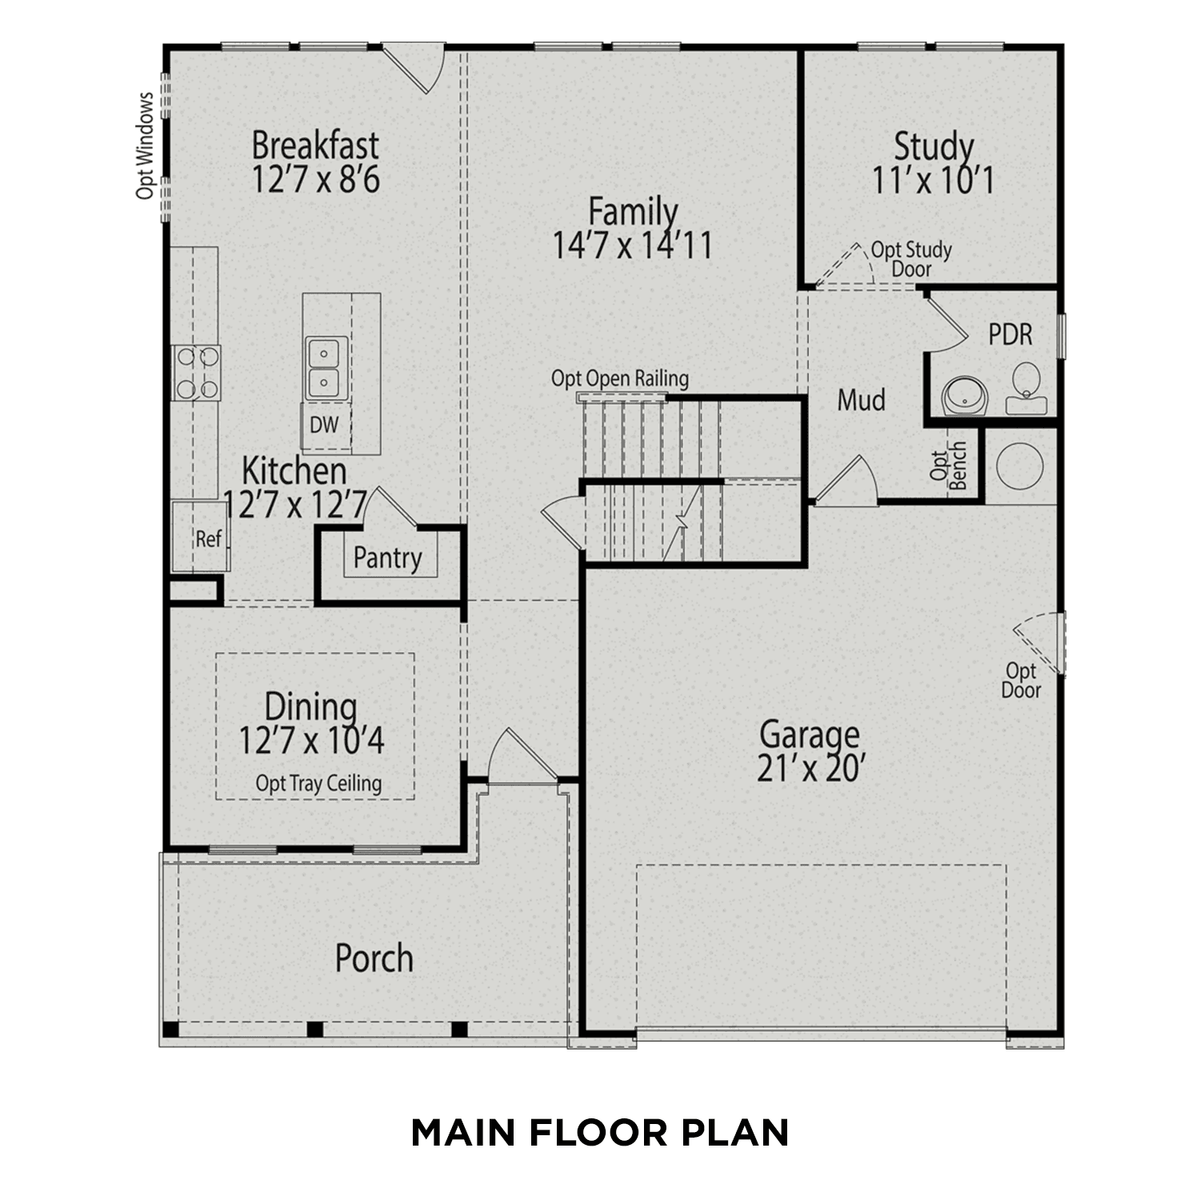 1 - The Willow E floor plan layout for 637 Marion Hills Way in Davidson Homes' Glenmere community.